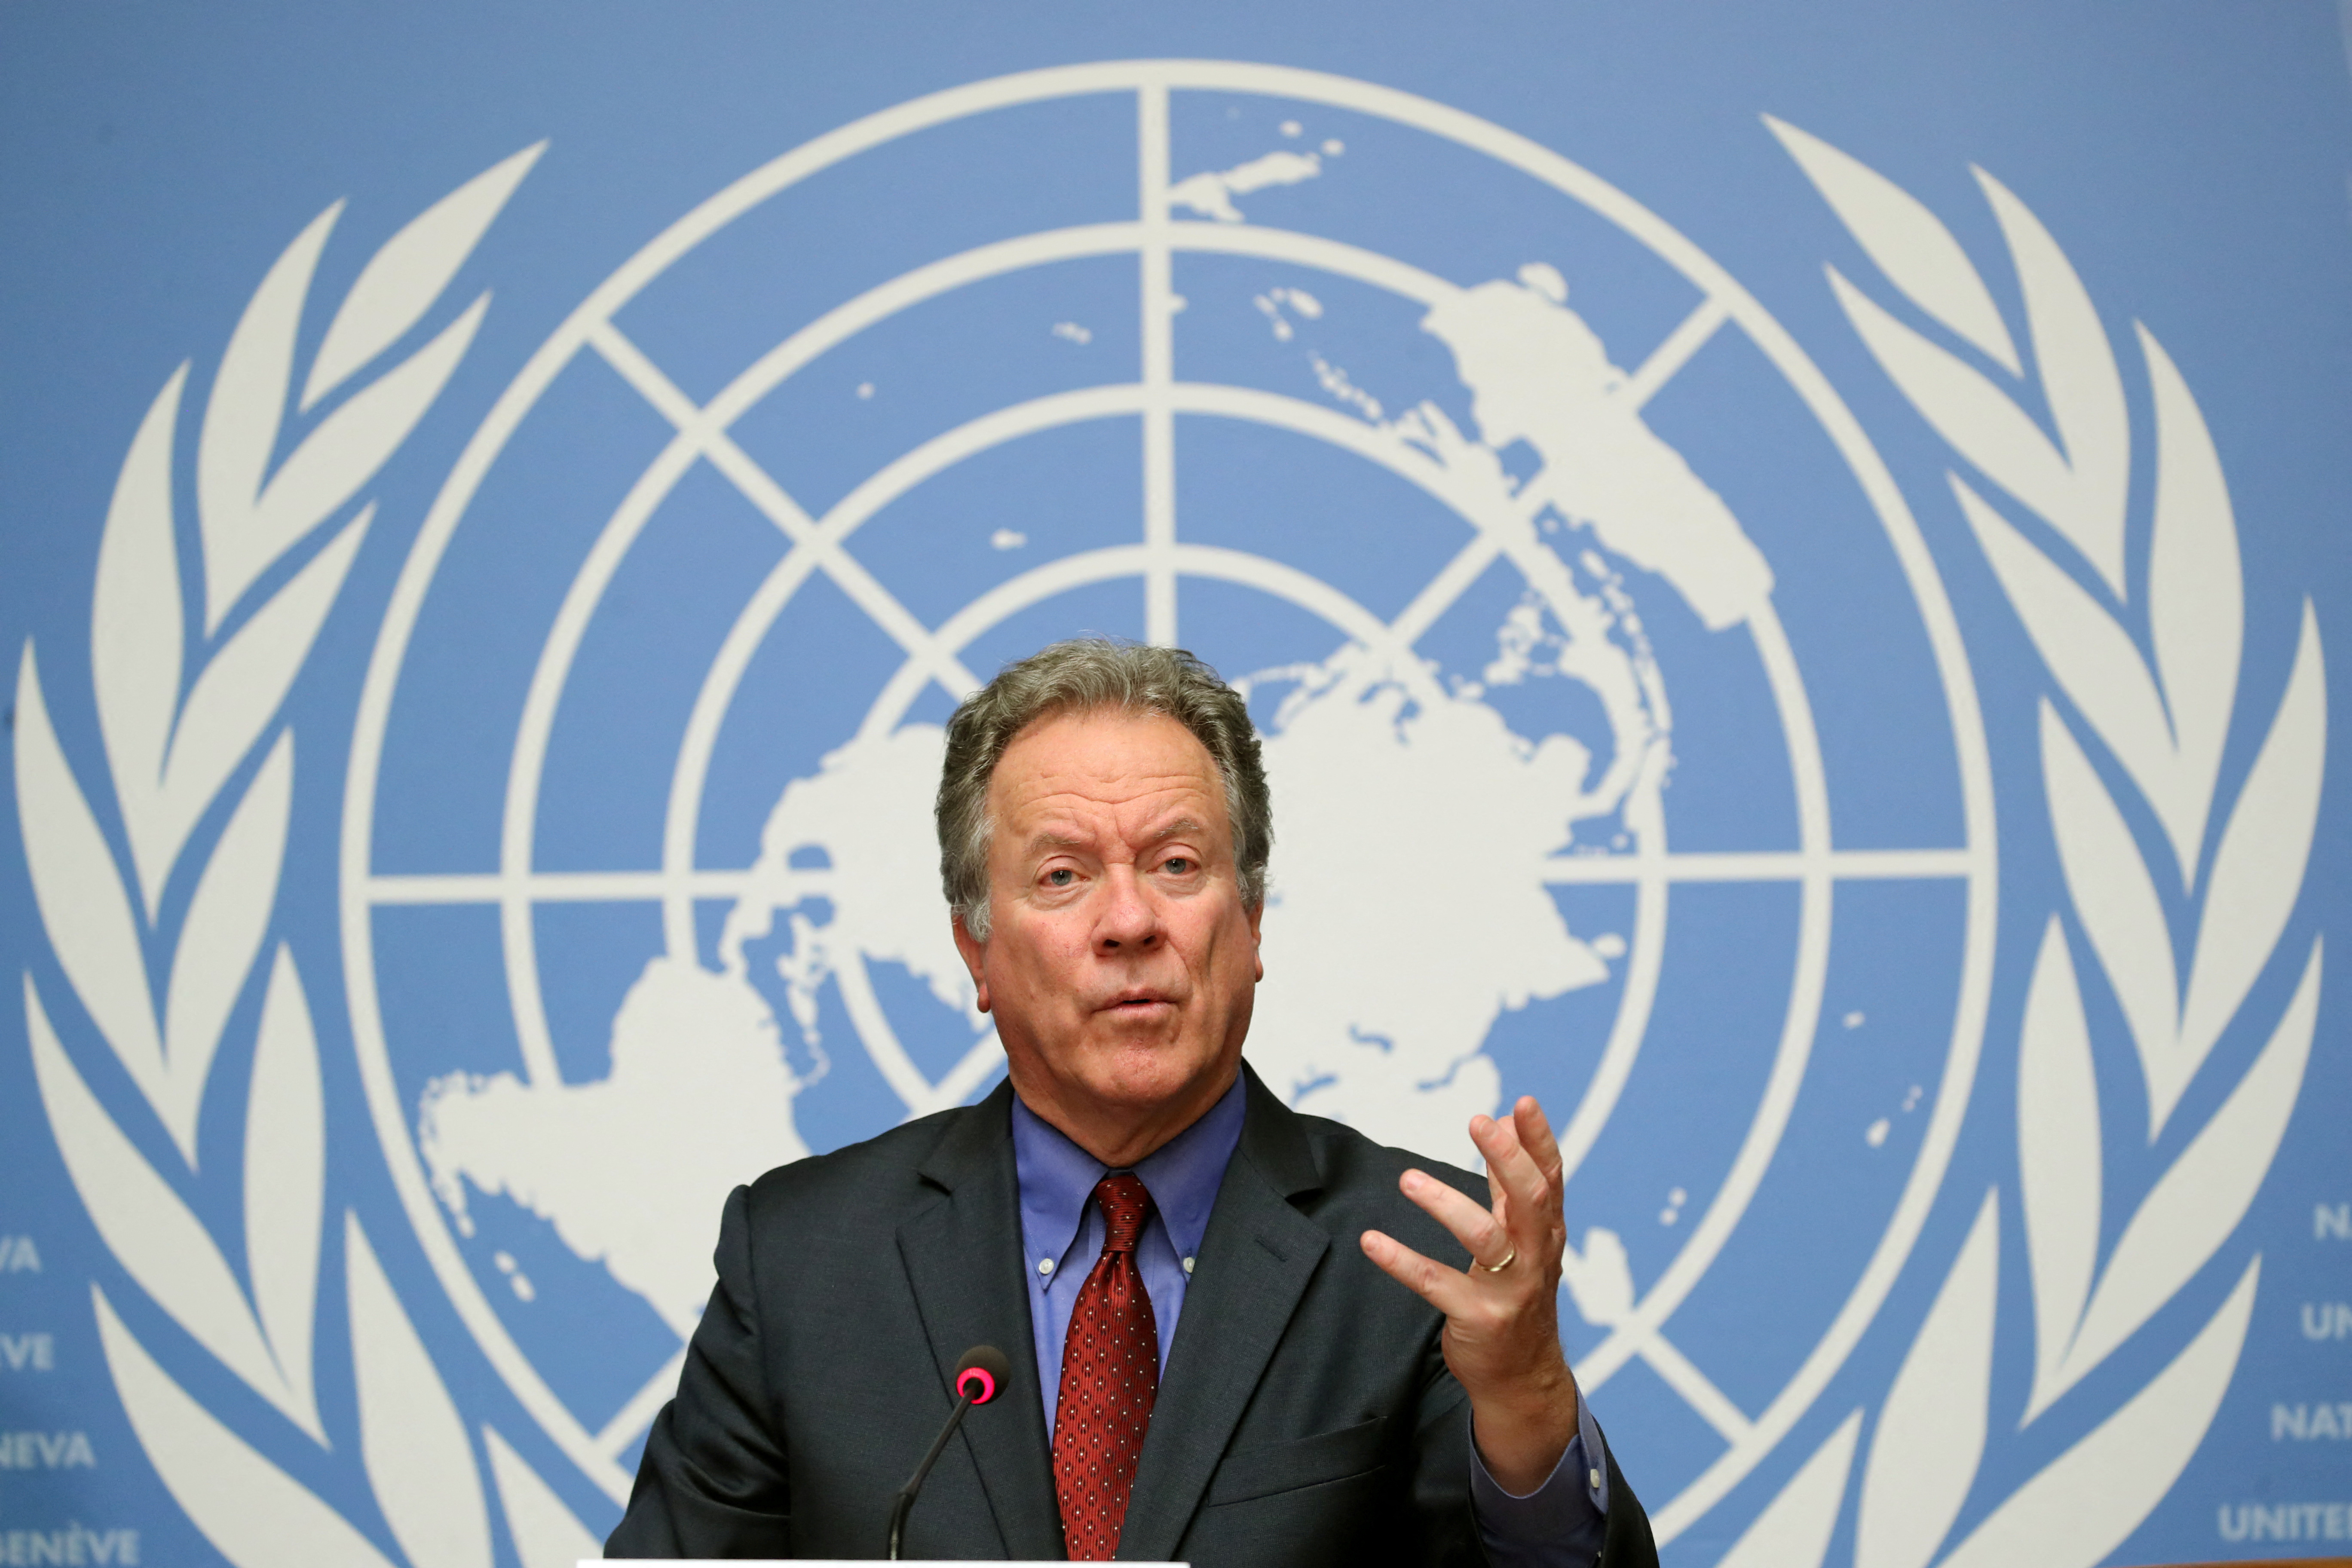 WFP Executive director Beasley attends a news conference in Geneva